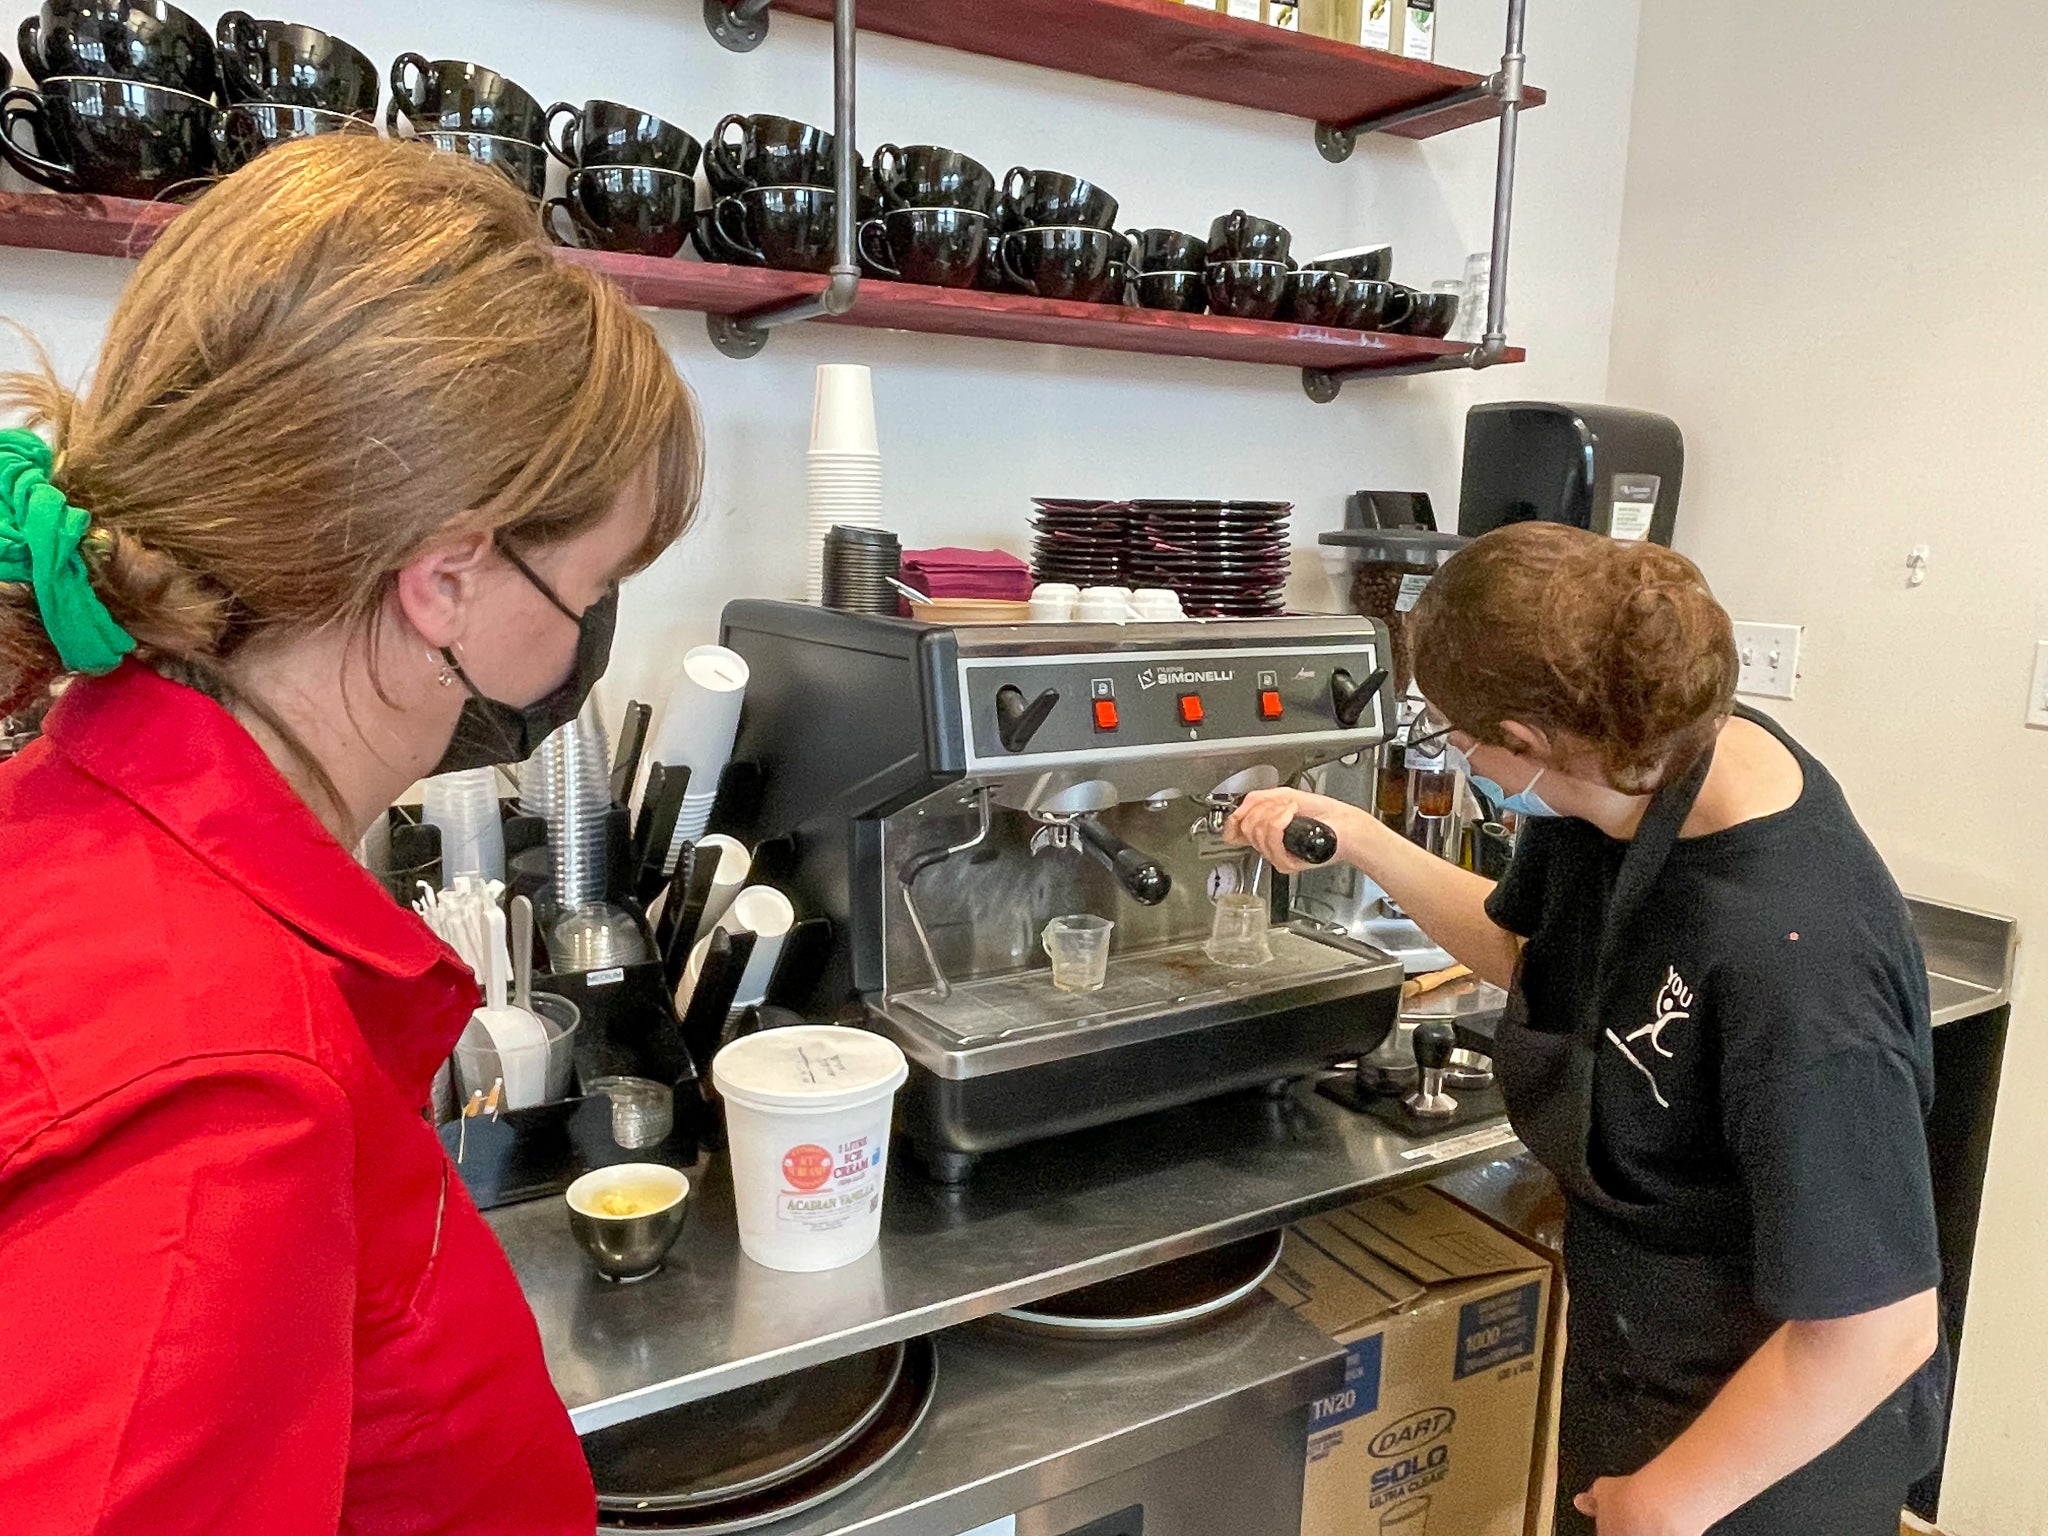 A youth mentor coaching a youth trainee on the espresso machine.